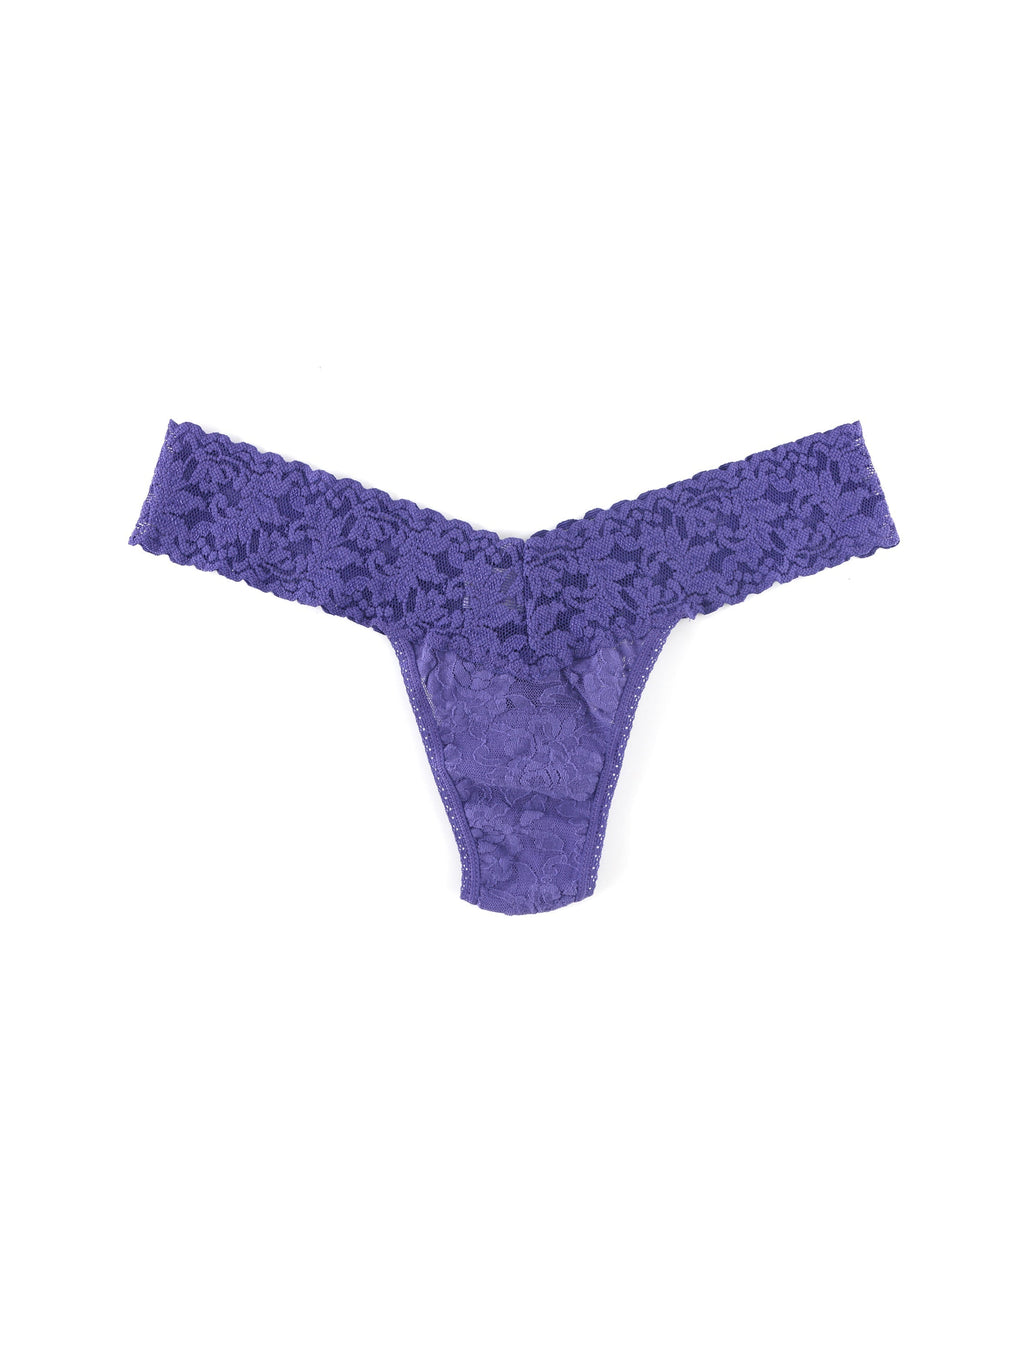 Butterfly Bliss: Low-Rise Lace Thong with Delicate Bow Accent